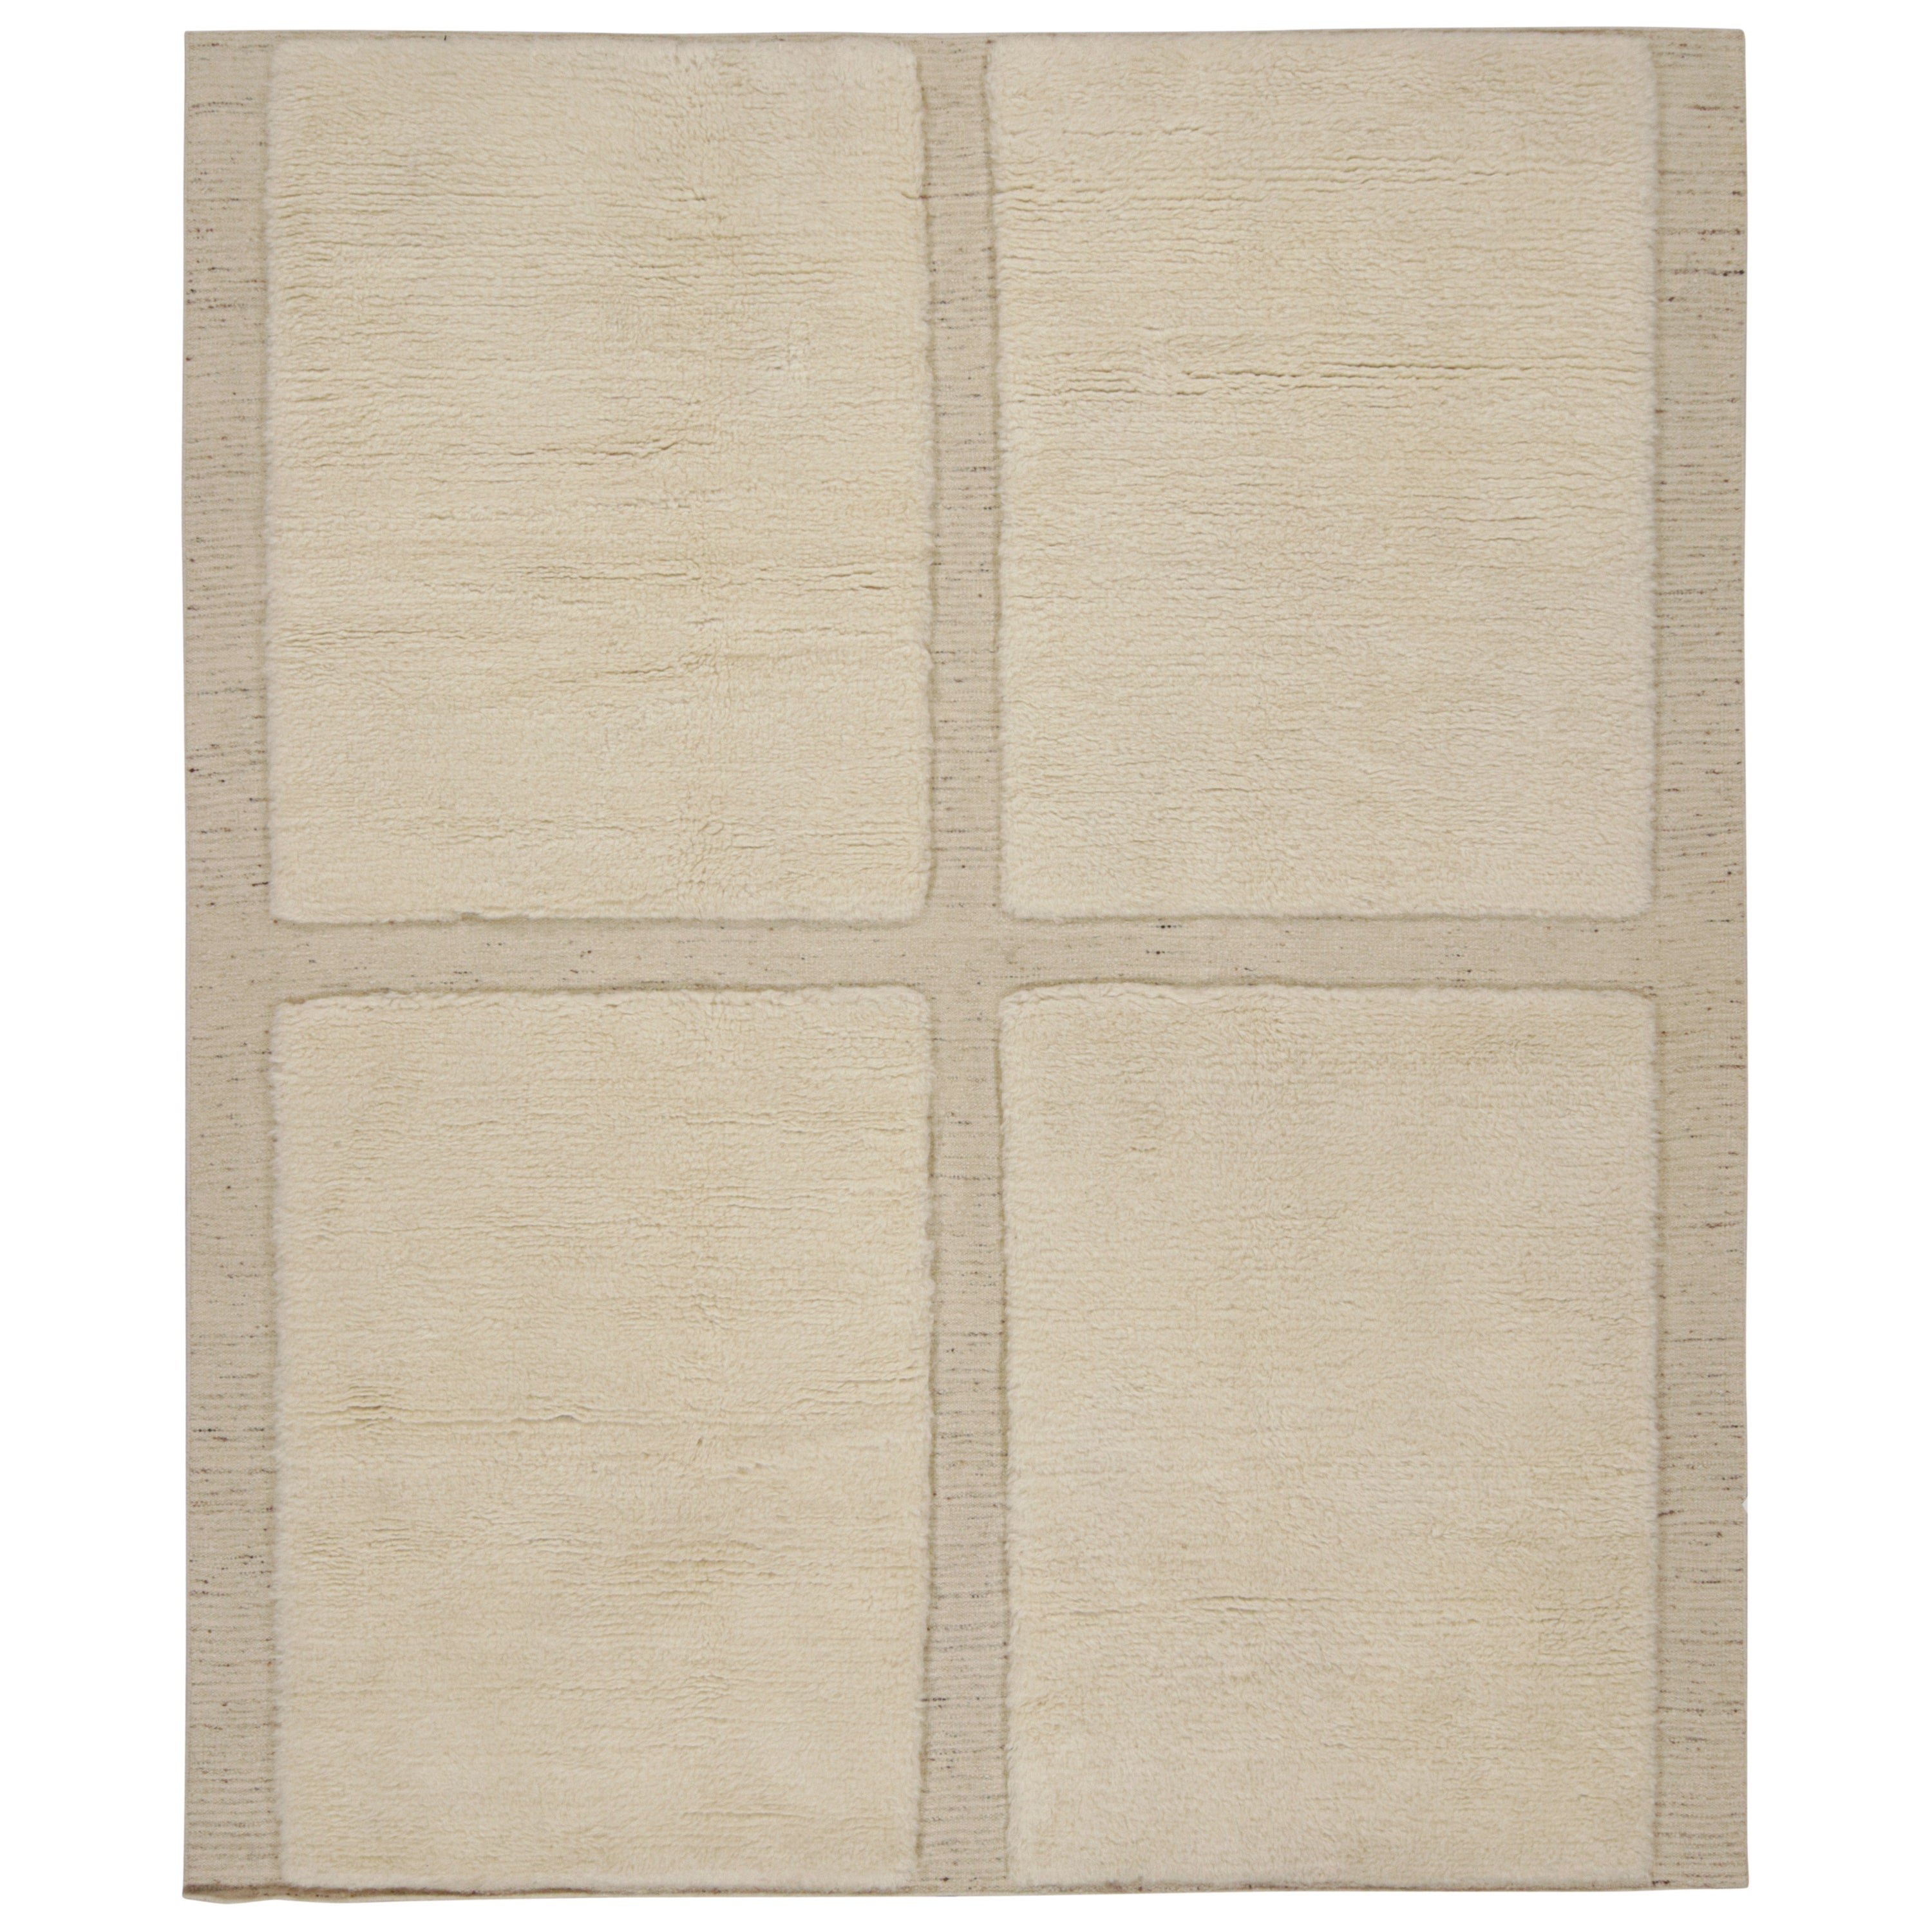 Rug & Kilim’s Moroccan Style Rug with Cream Tone High-Pile Geometric Patterns